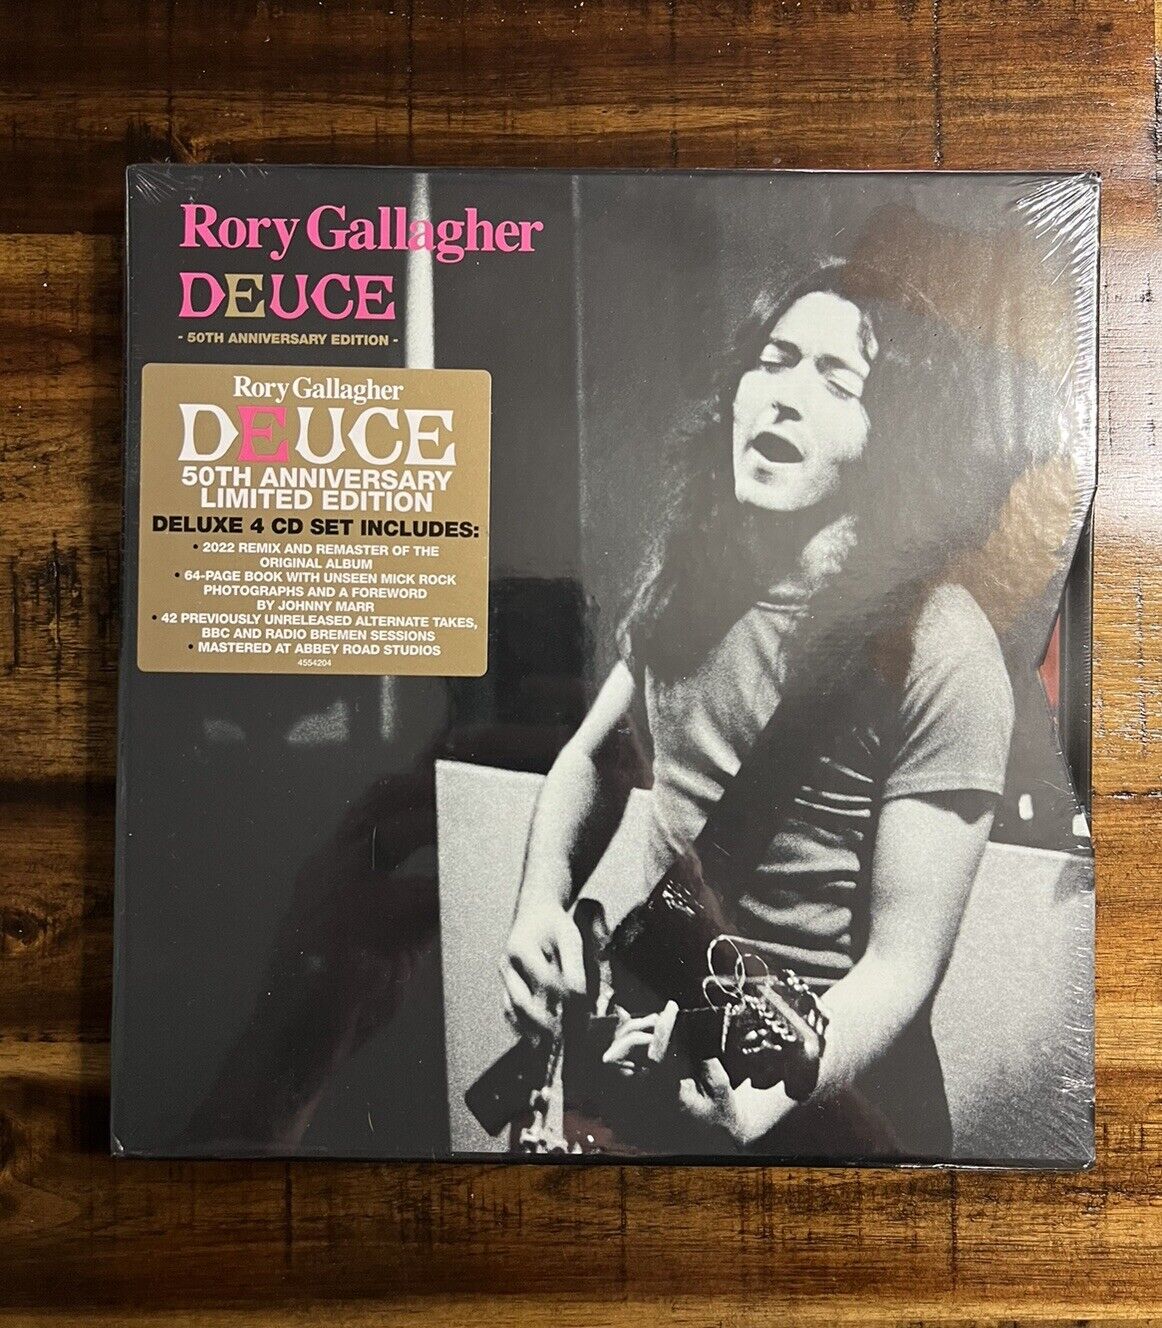 Deuce (50th Anniversary) - Rory Gallagher - 4 CD Box Set - Brand New & Sealed